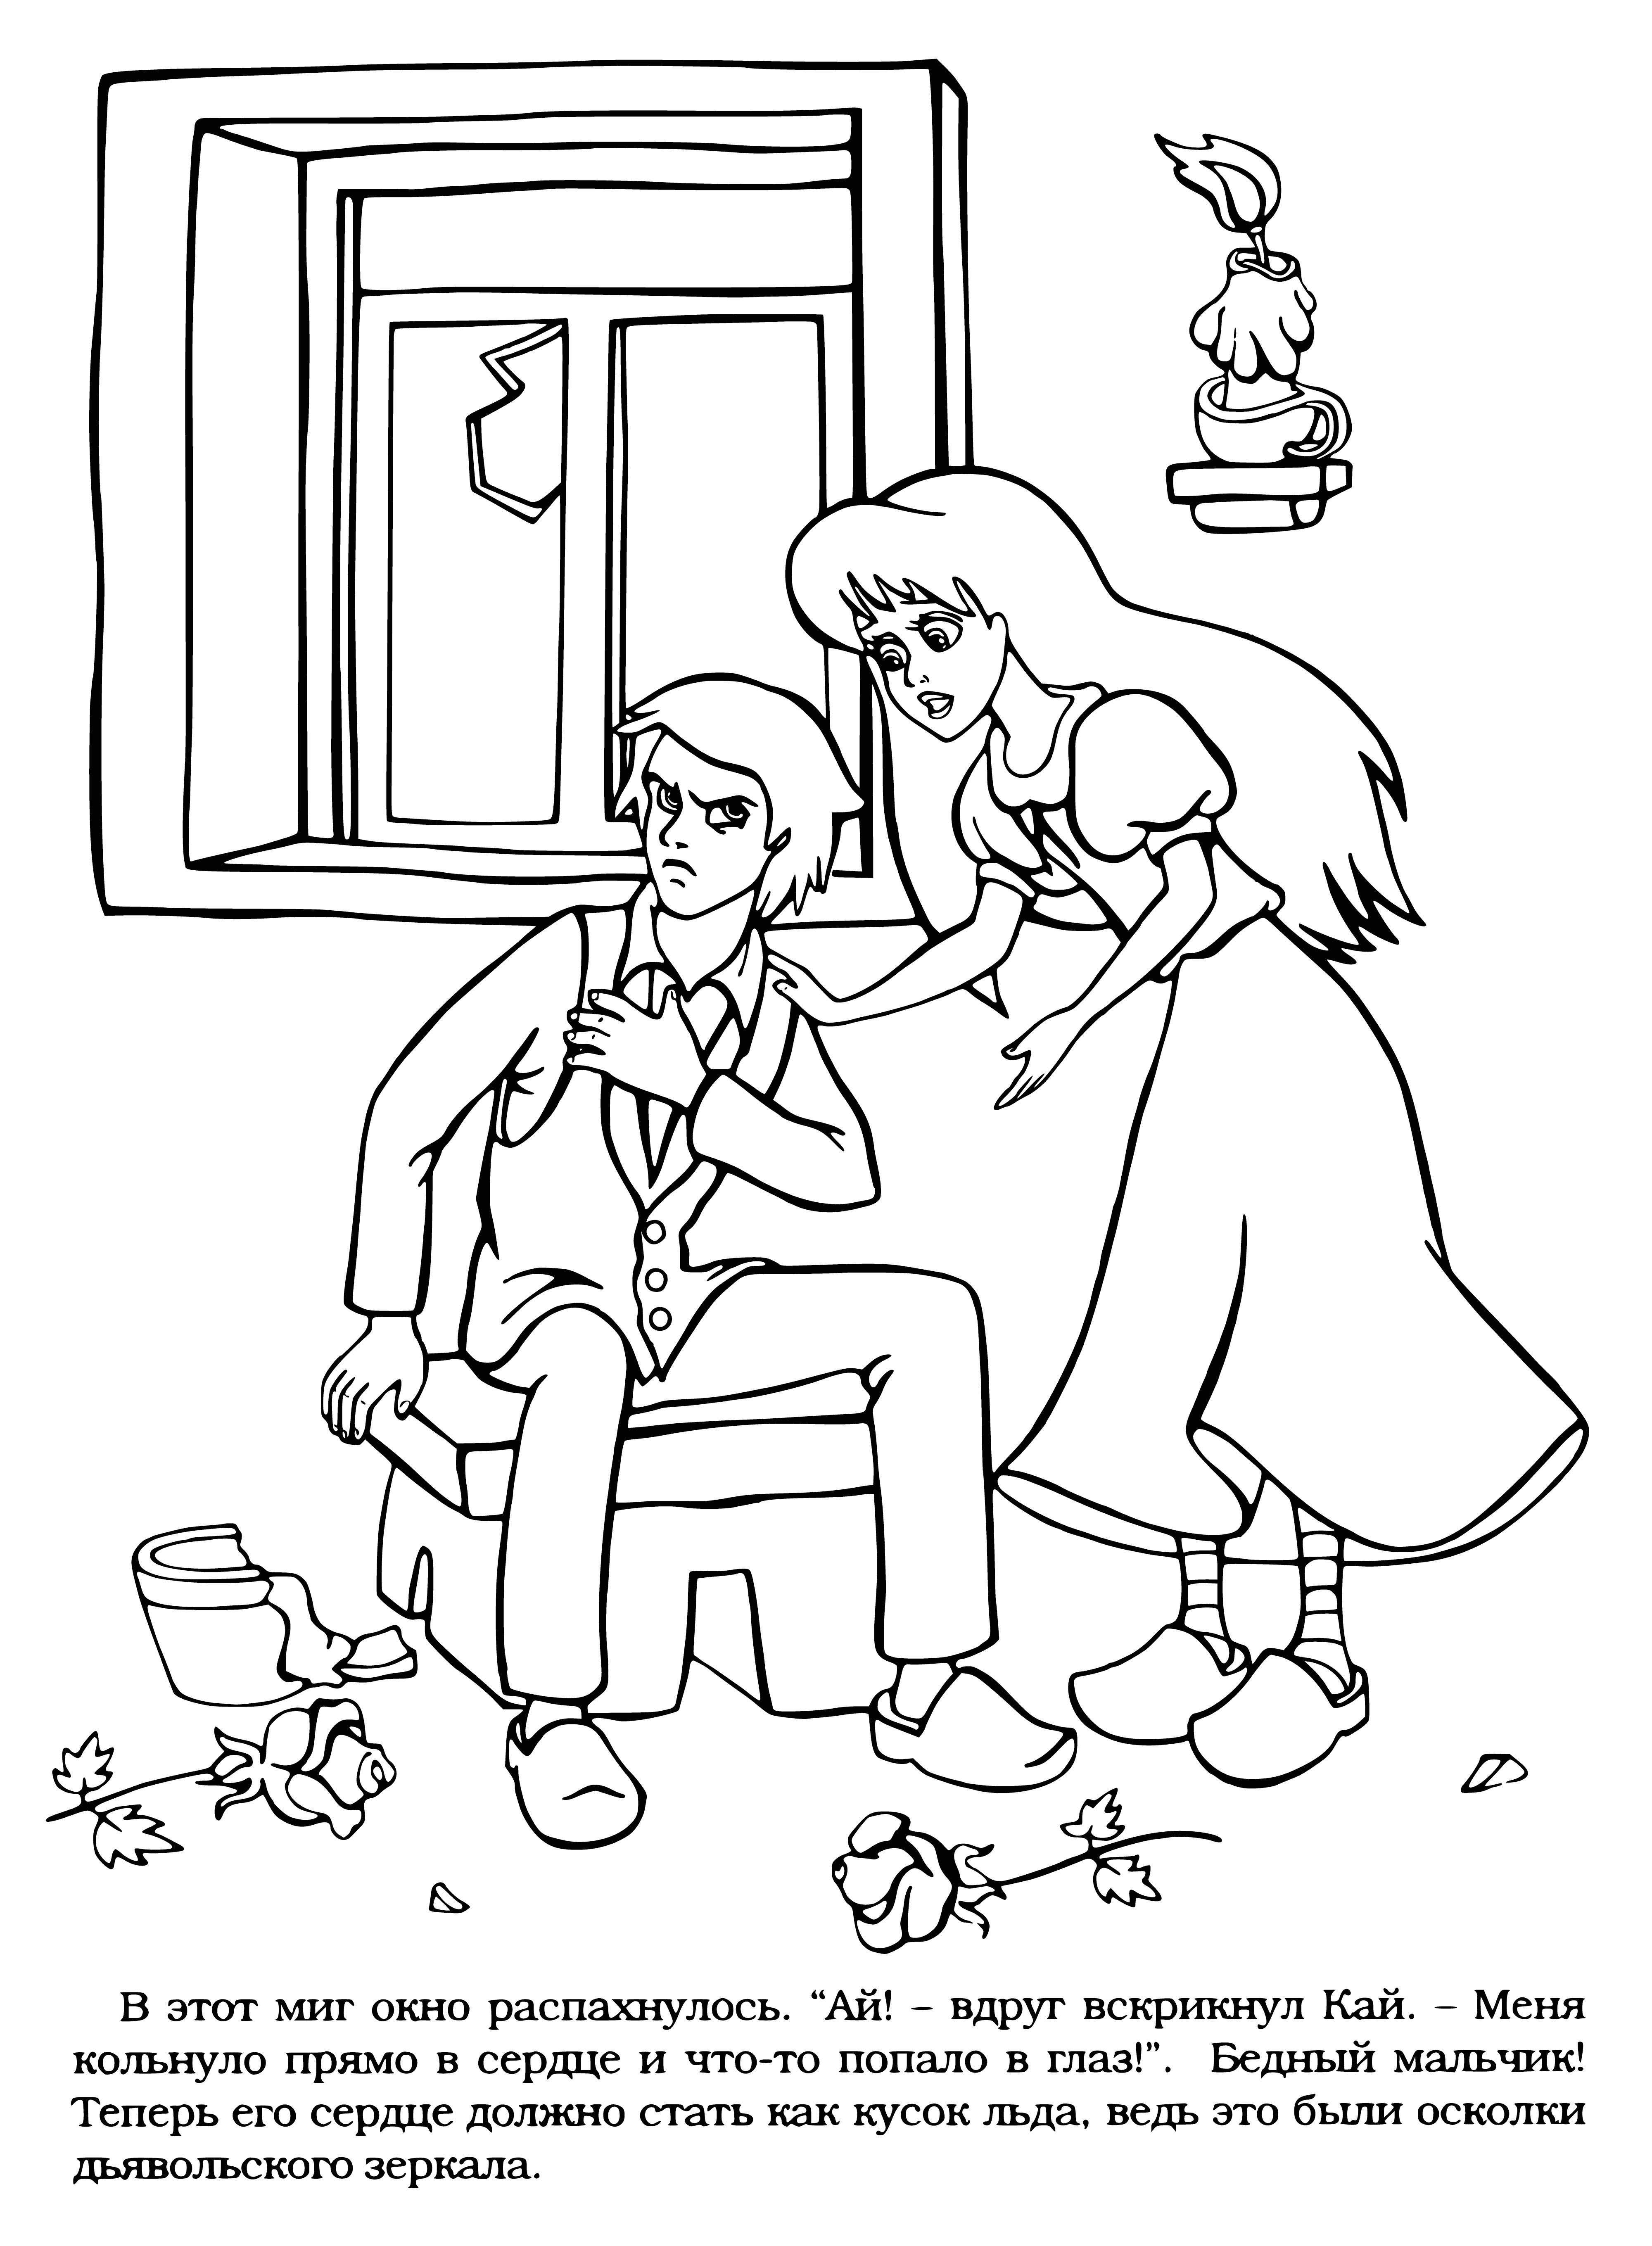 coloring page: Gerda weeps for Kai in the snow-covered ground.